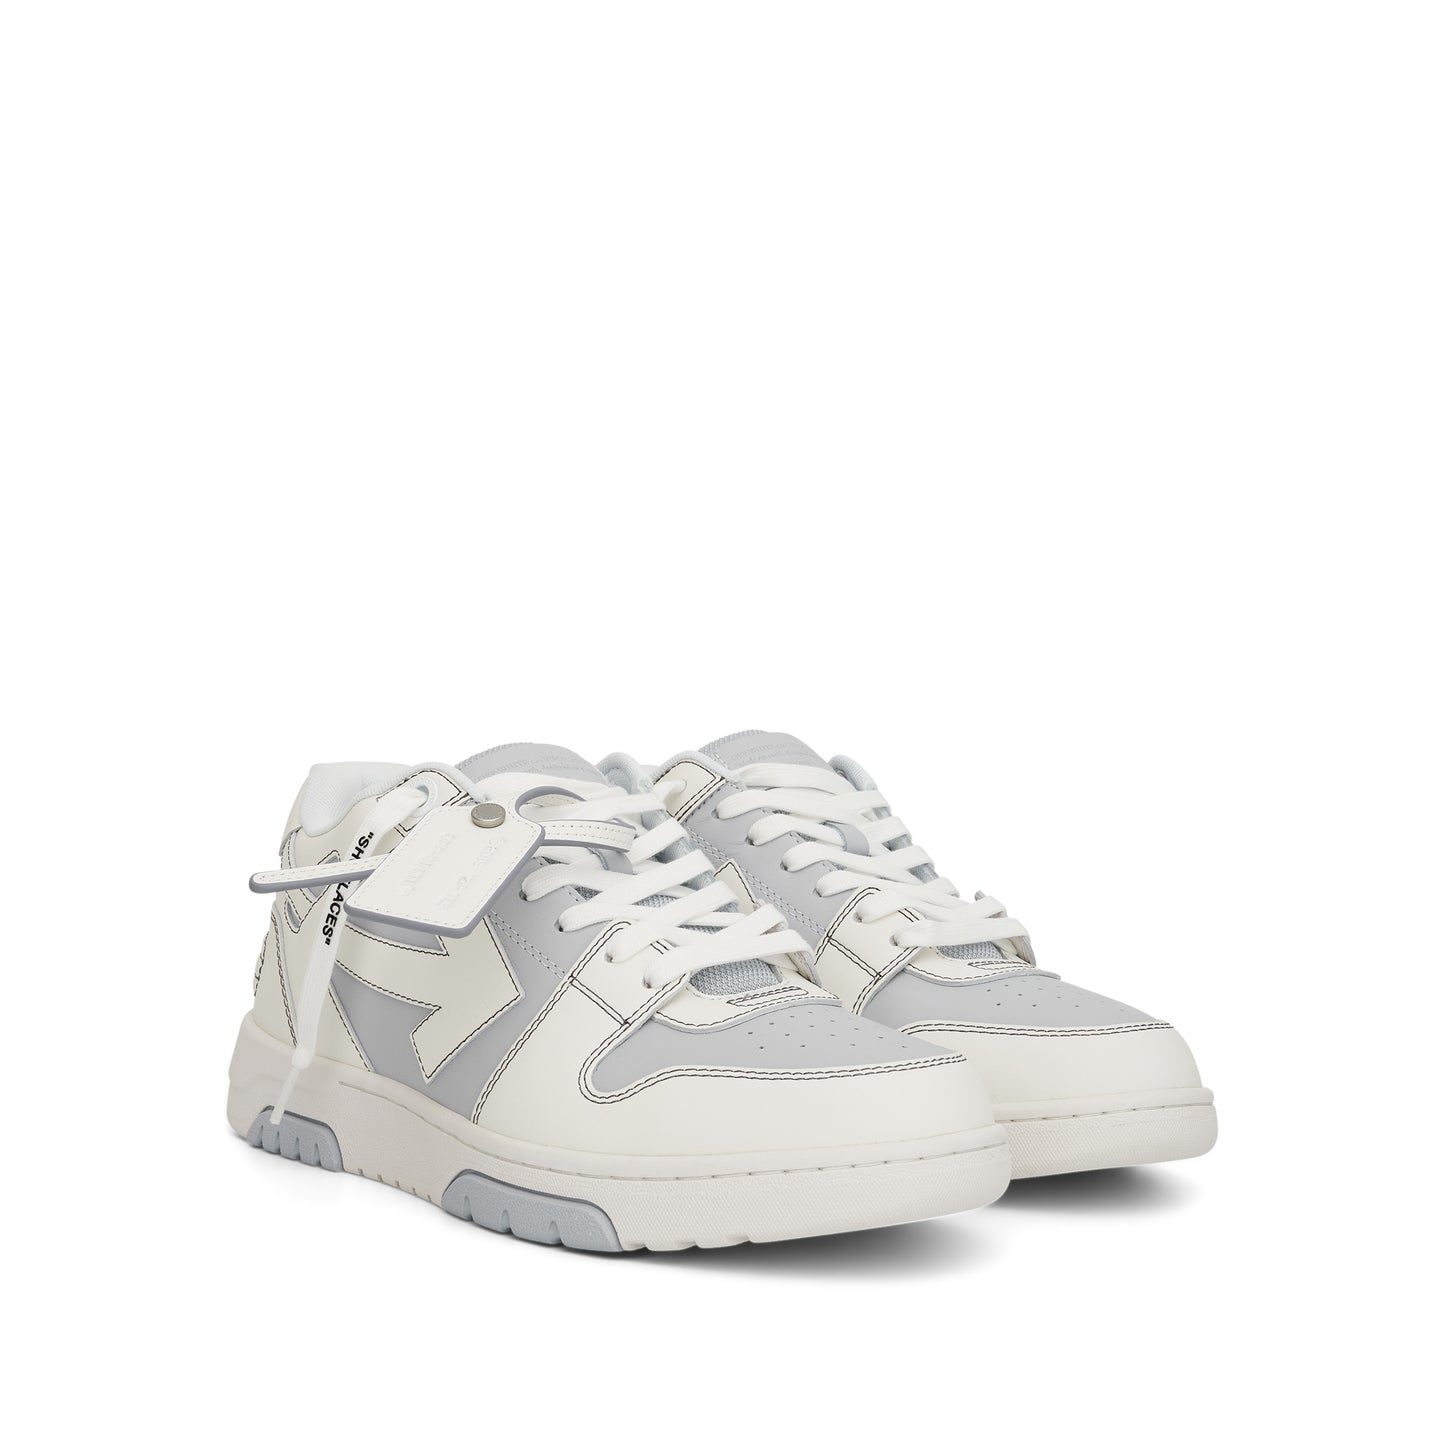 Out of Office Calf Leather Sneaker in Light Blue/White